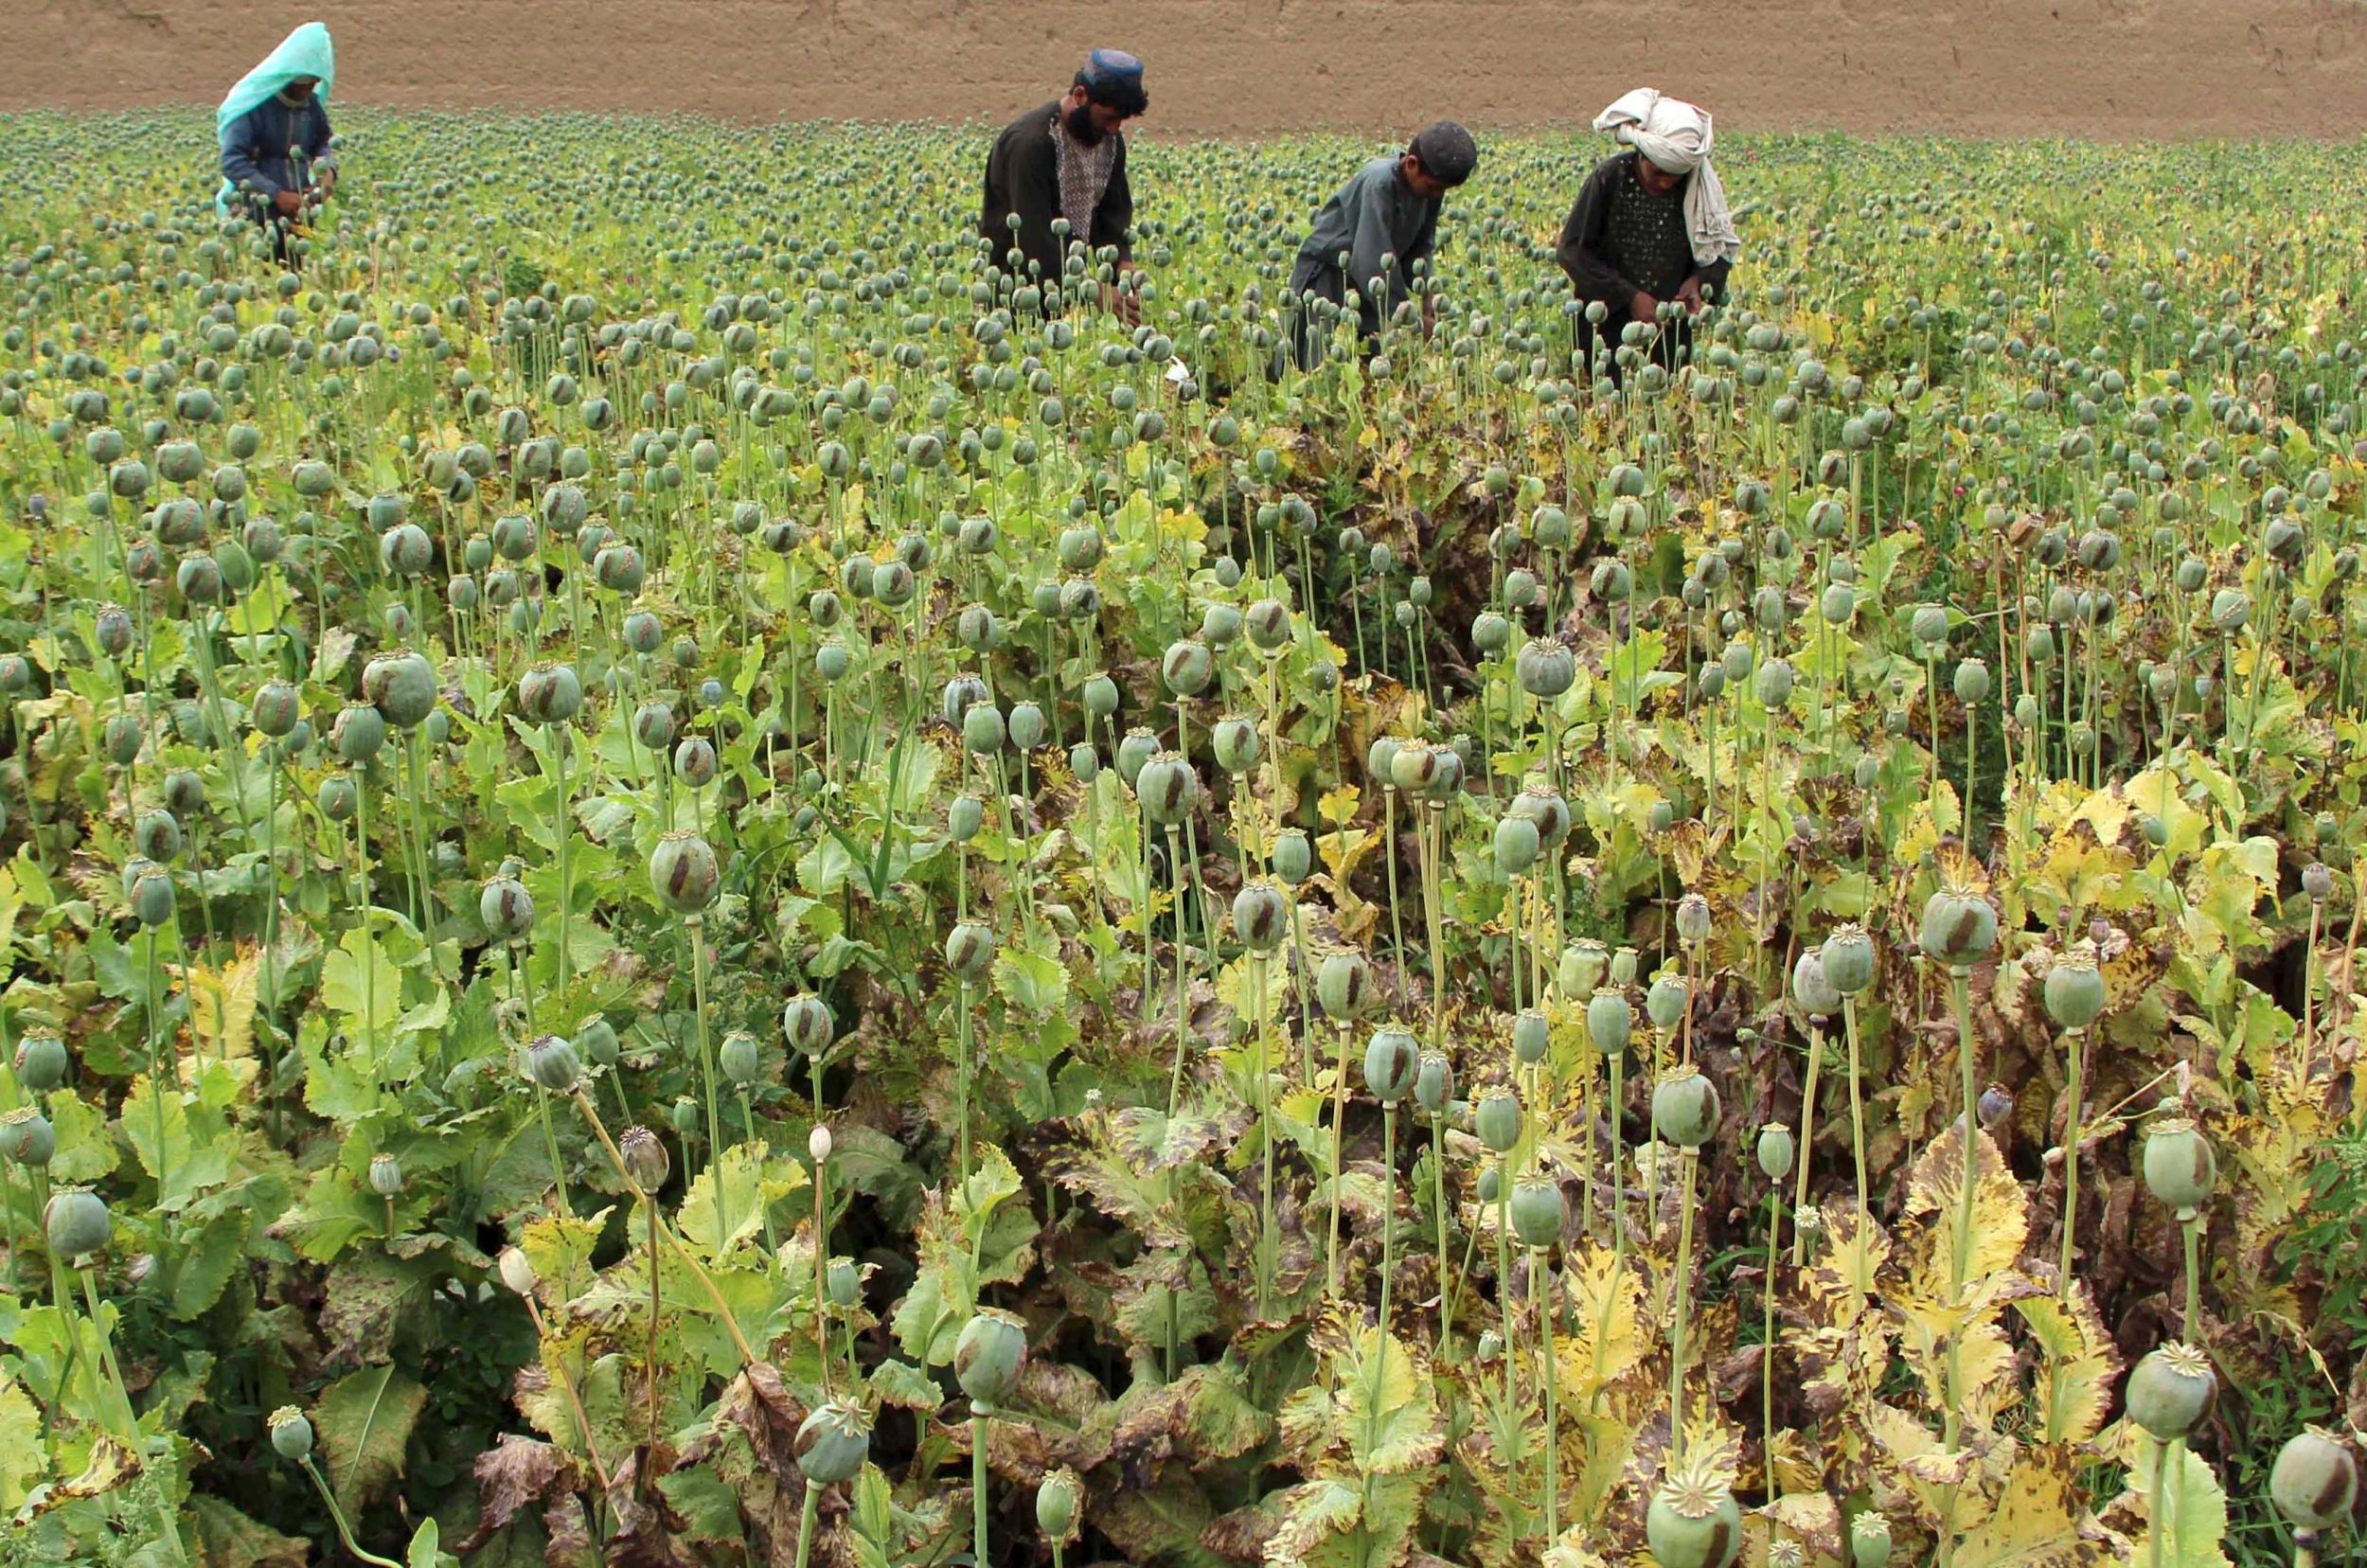 Afghan farmers work on a poppy field in the Gereshk district of Helmand province